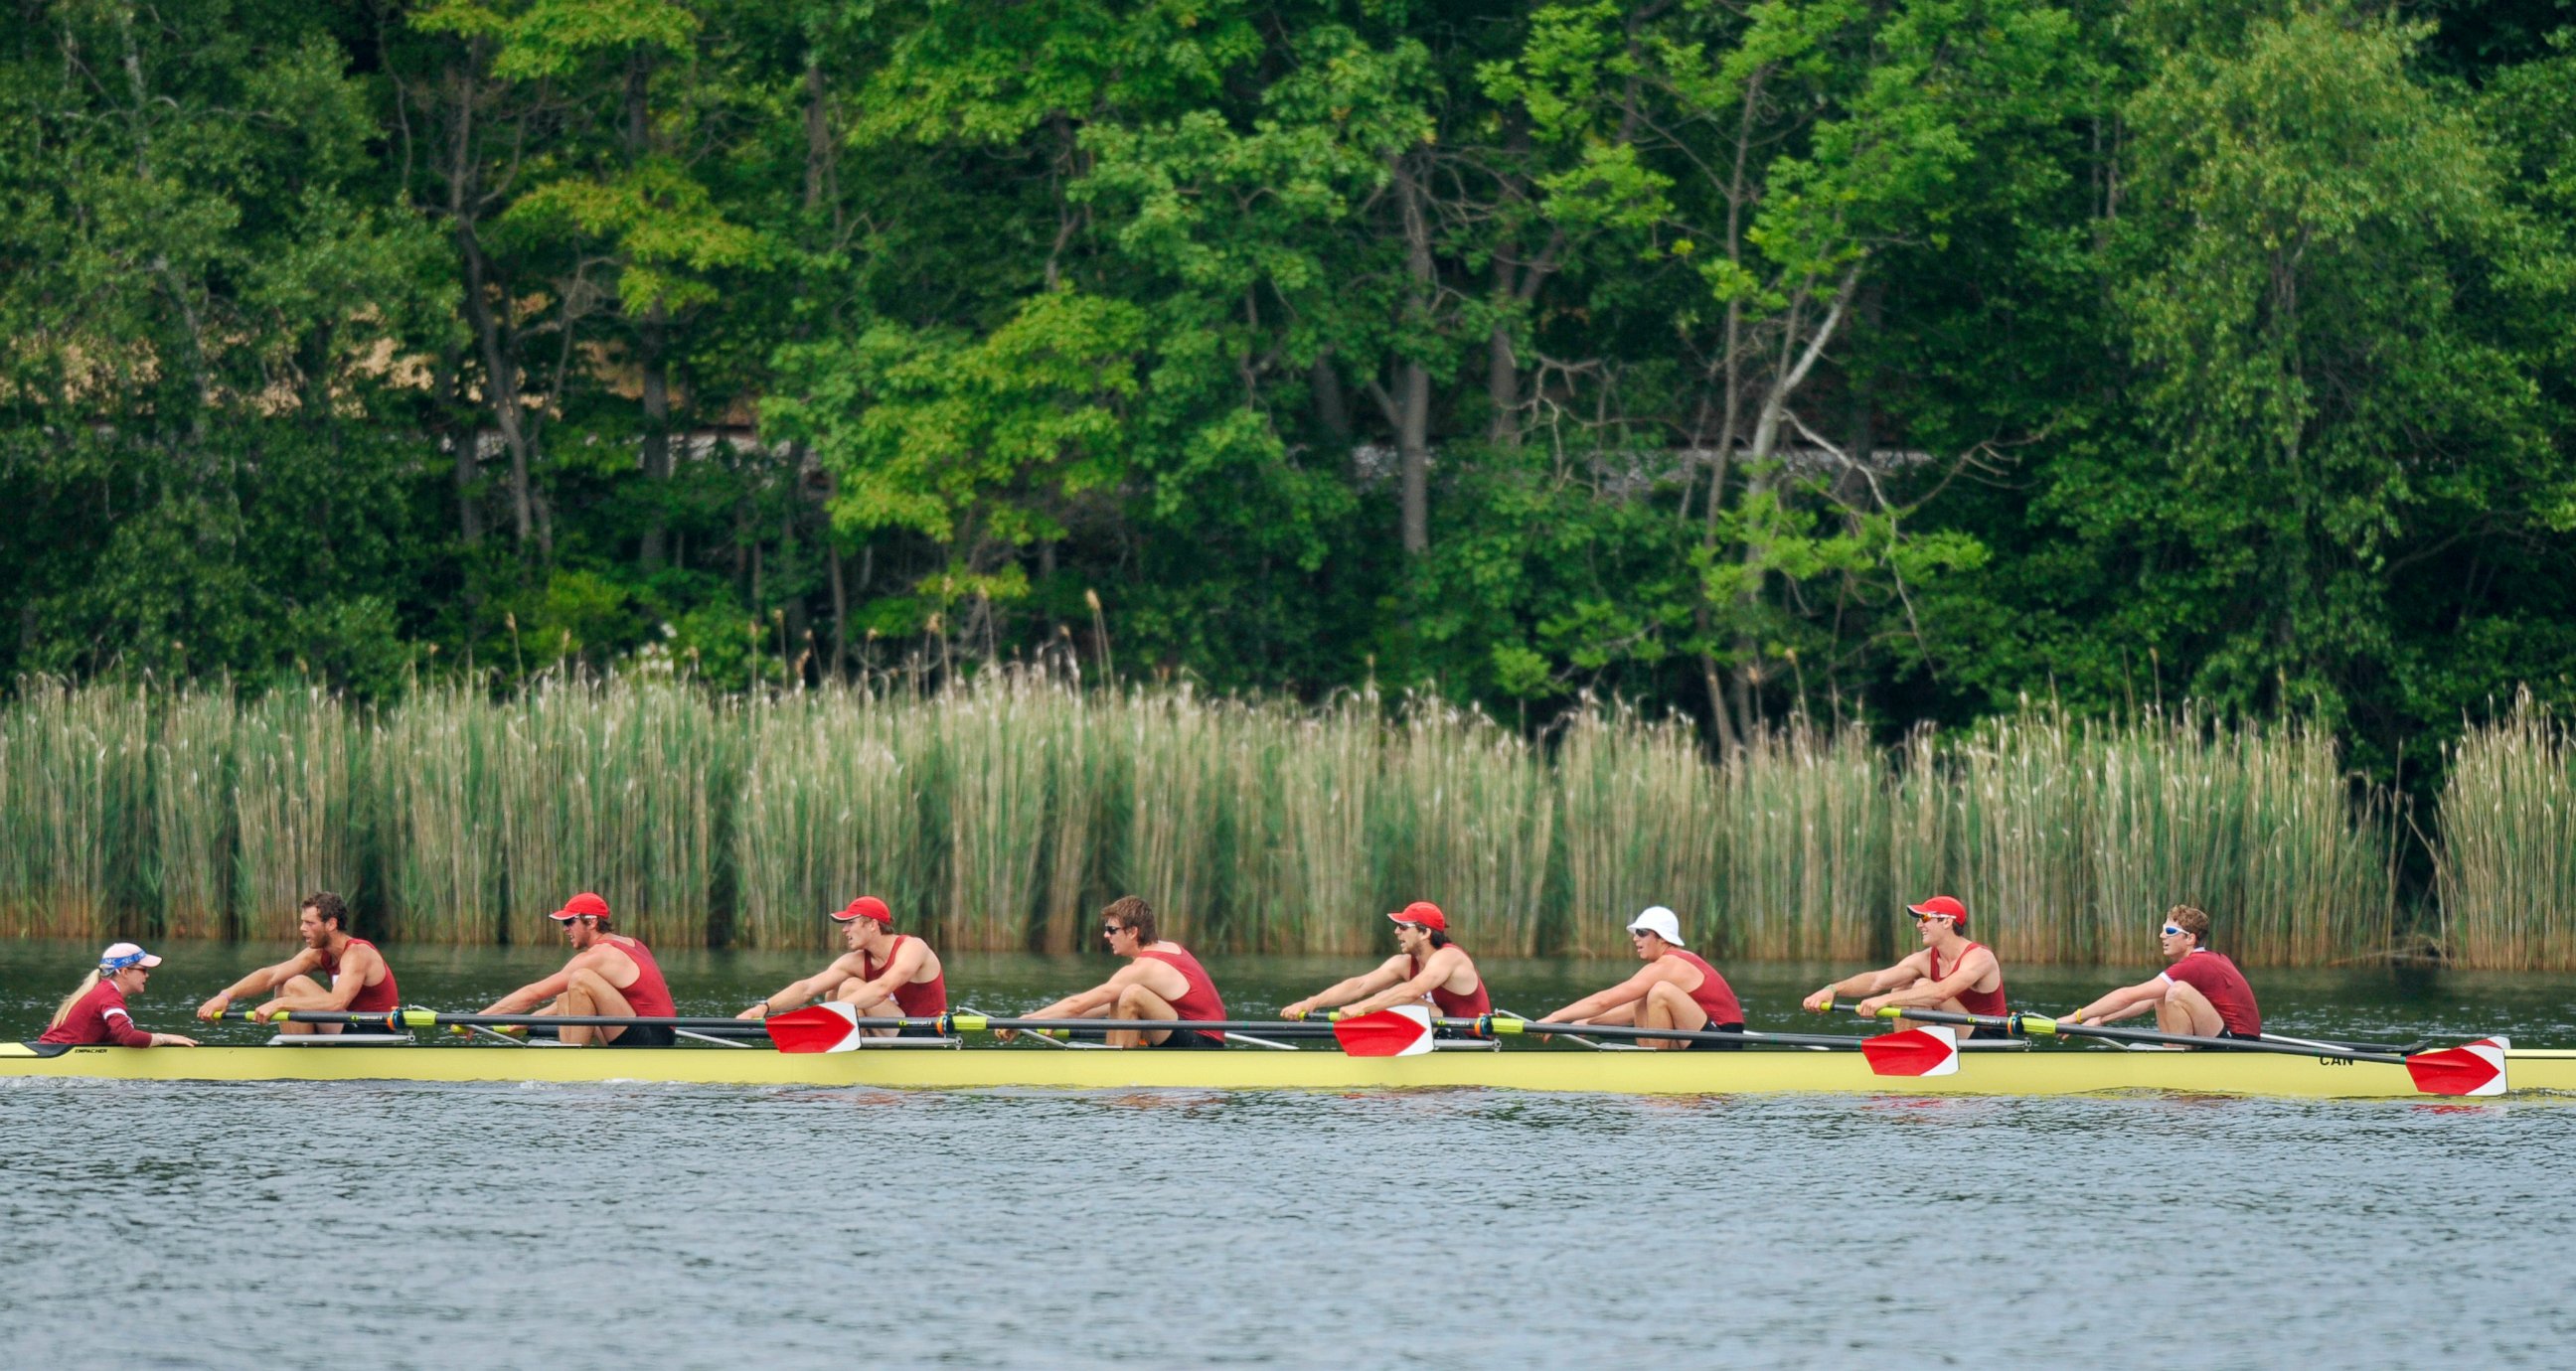 PHOTO: Harvard's crew races the four-mile course along the Thames Rivers for the 145th Harvard-Yale Regatta in New London, Conn., May 29, 2010.